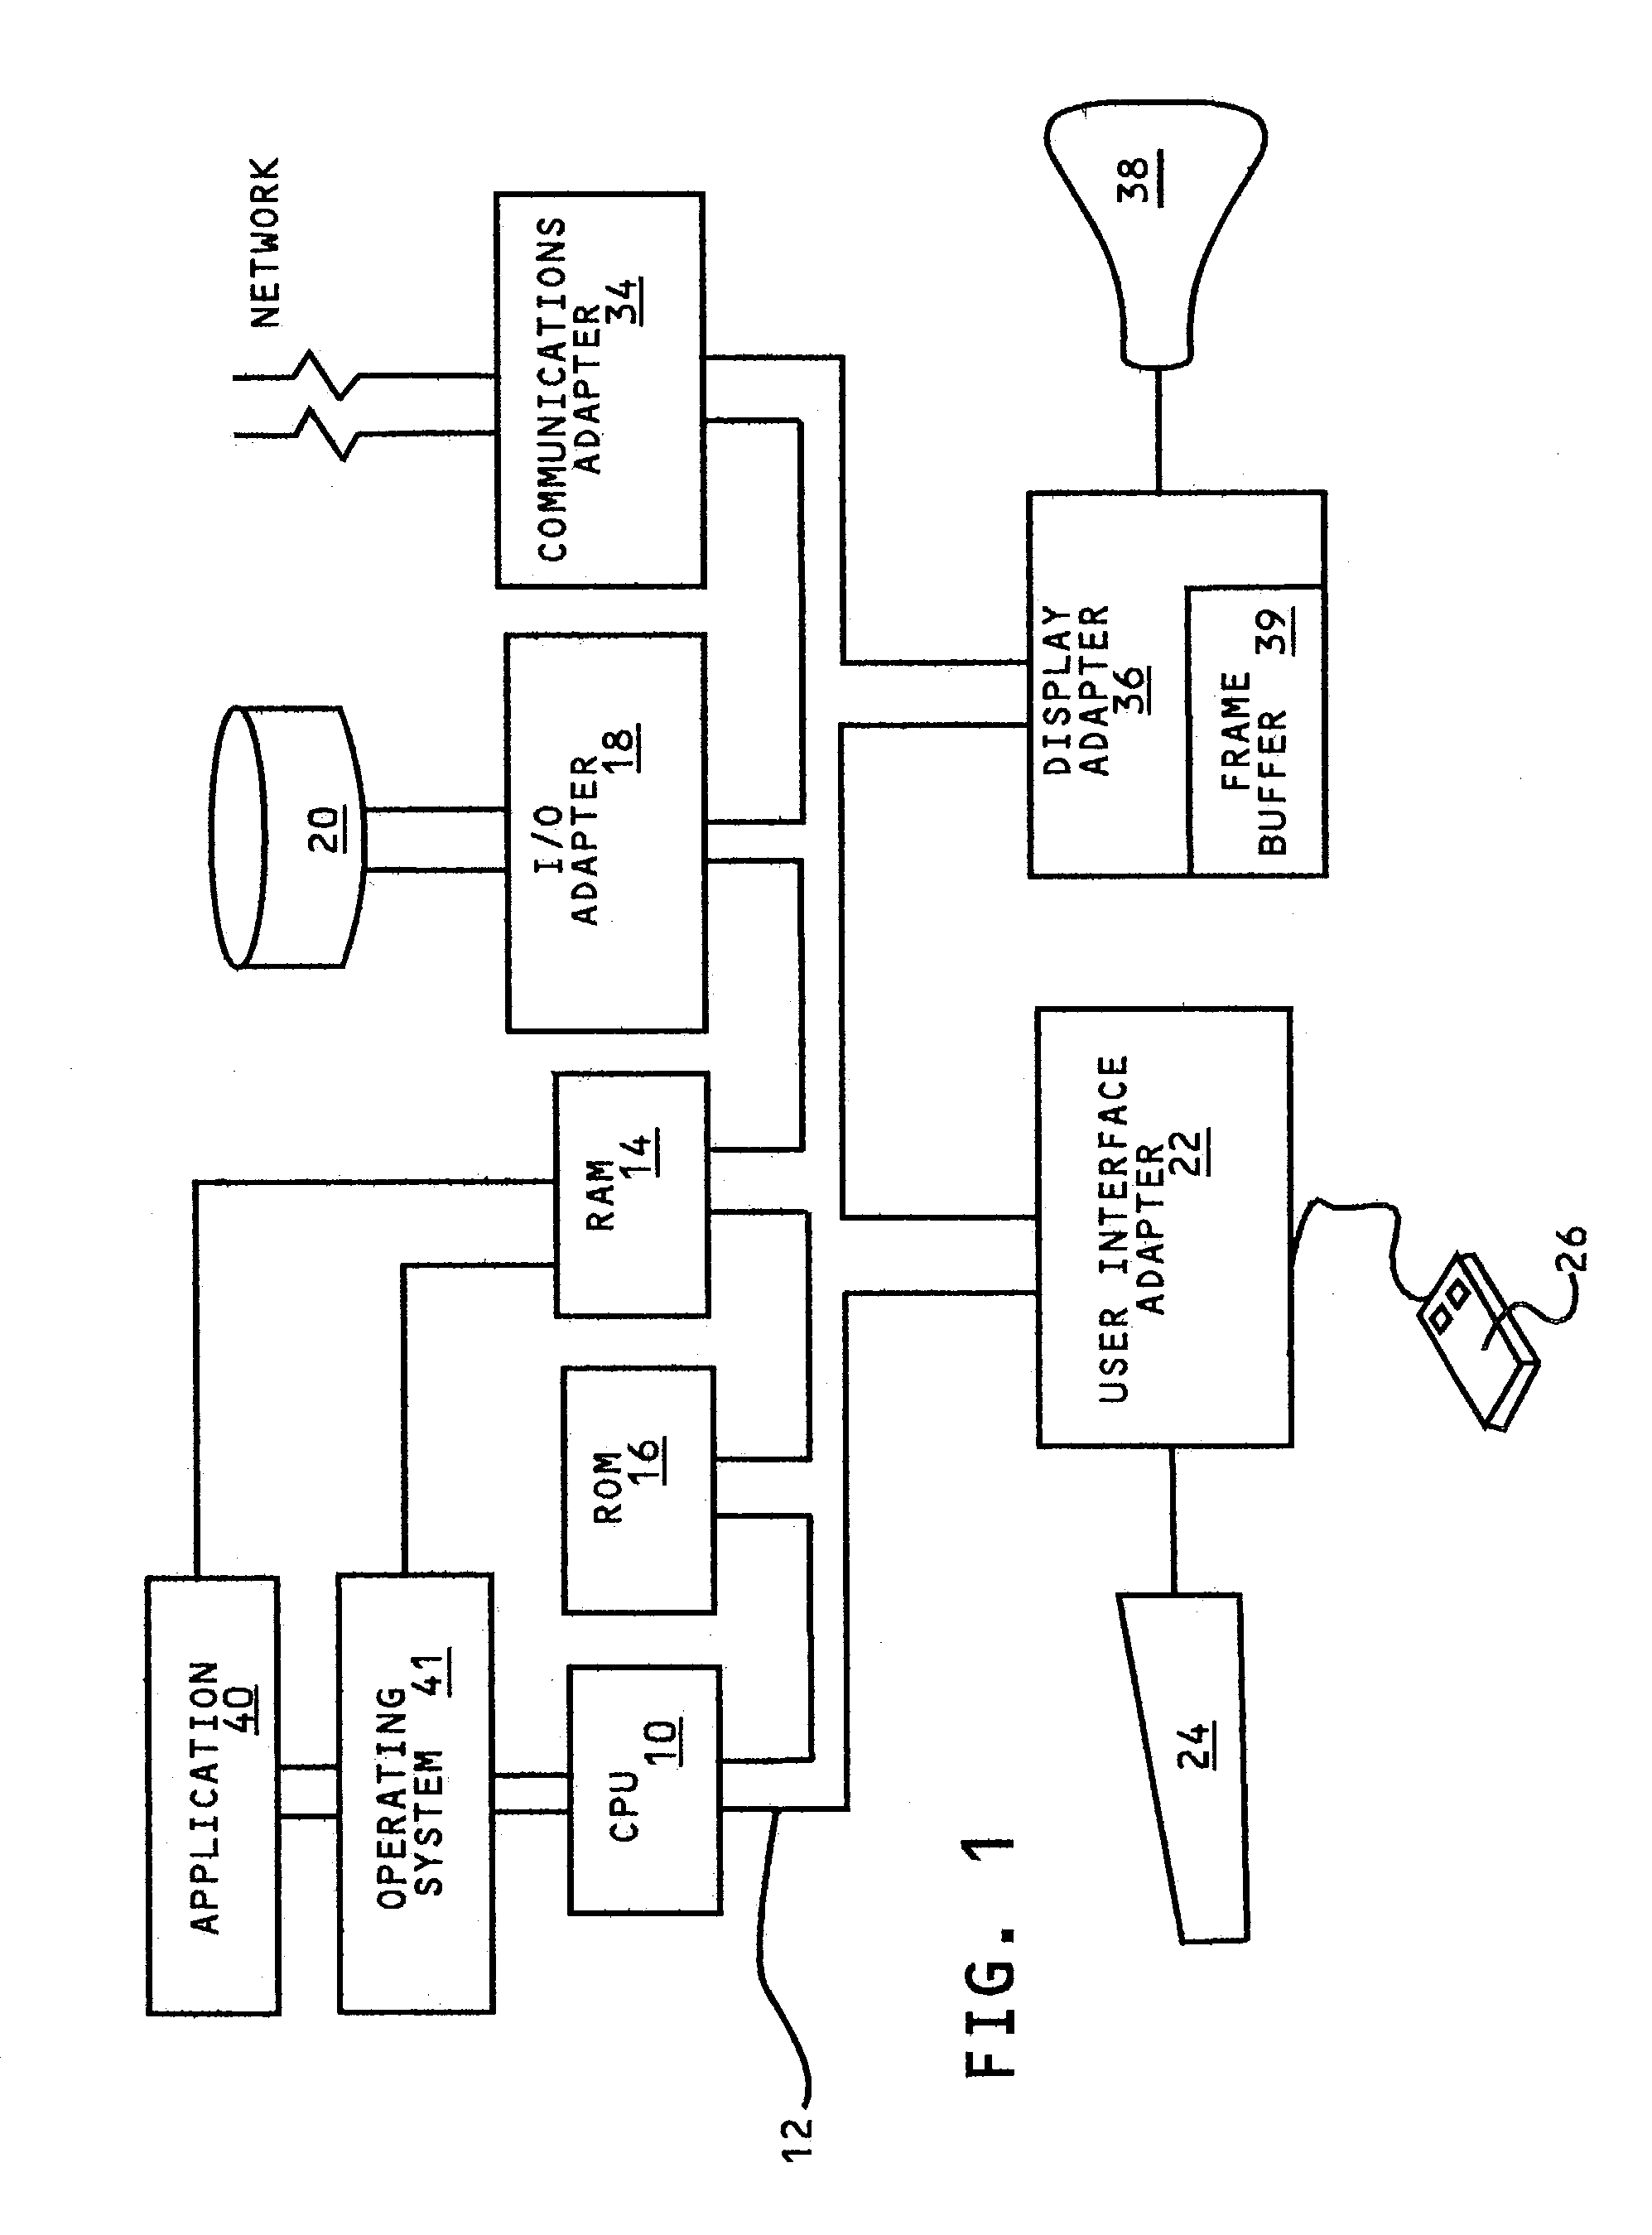 Electronic mail distribution via a network of computer controlled display terminals with interactive display interfaces enabling senders/receivers to view sequences of only text from sequences of E-Mail having same headers